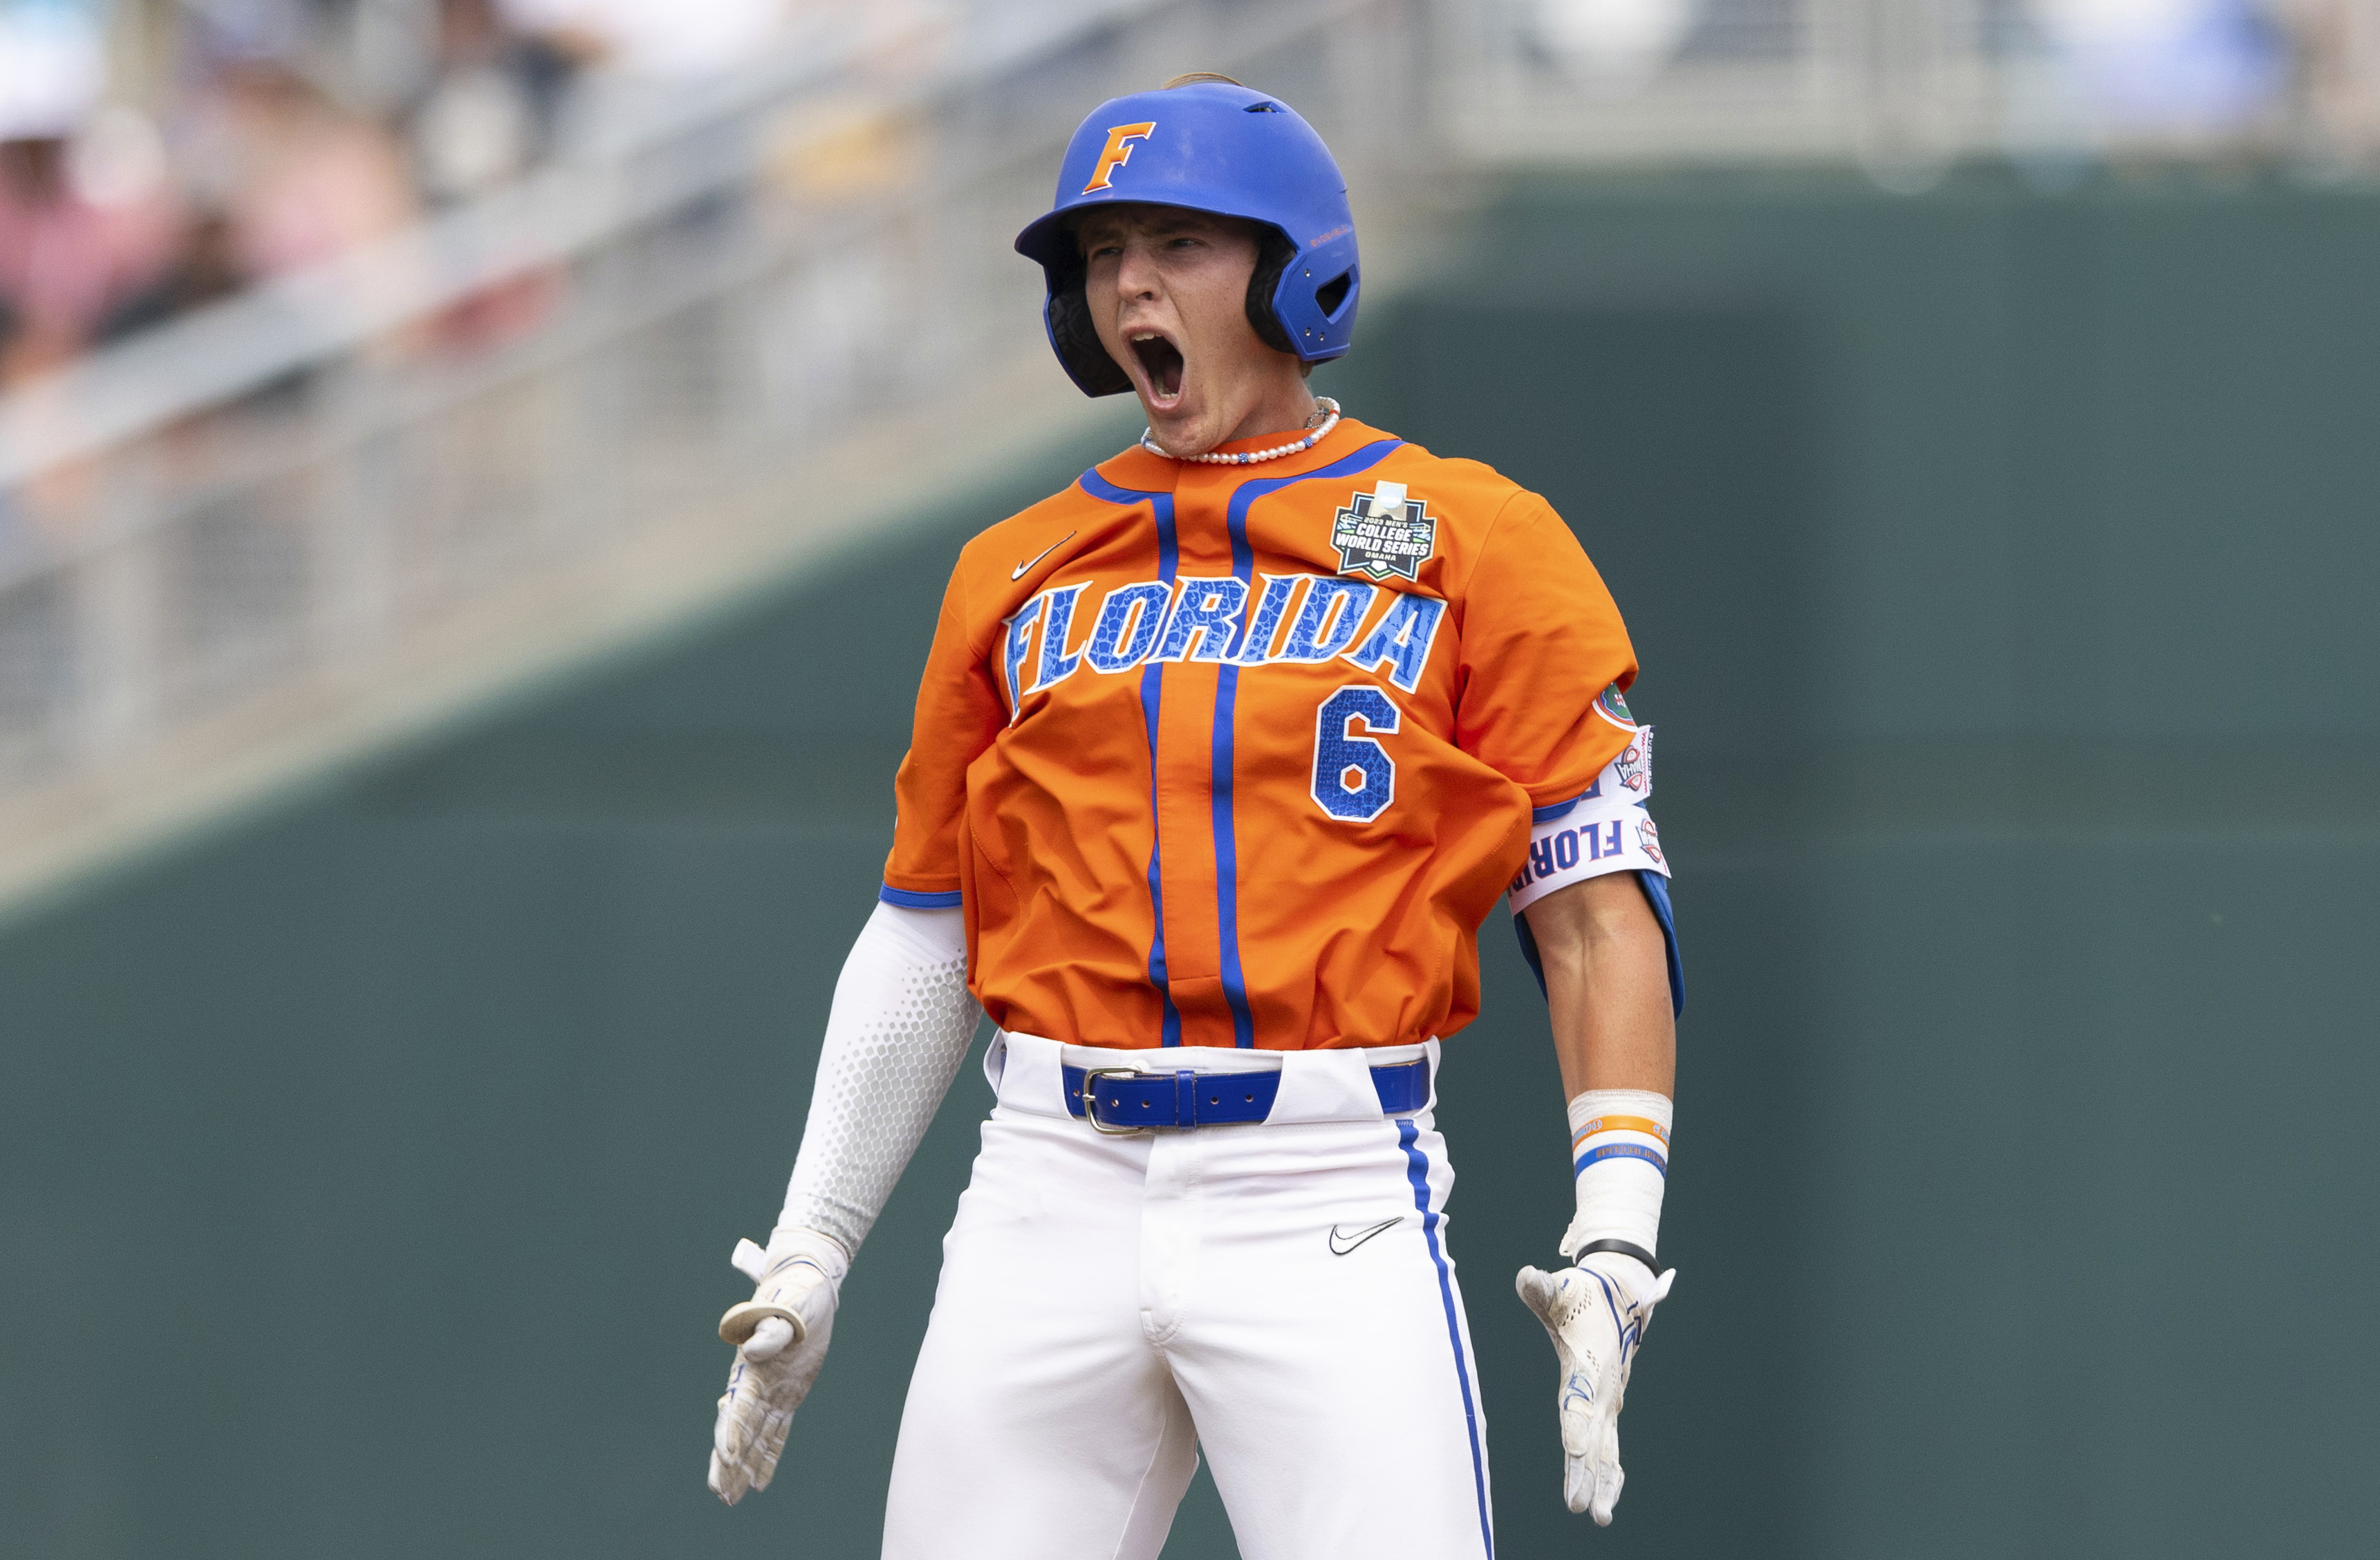 Florida locks up spot in the College World Series finals with a 3